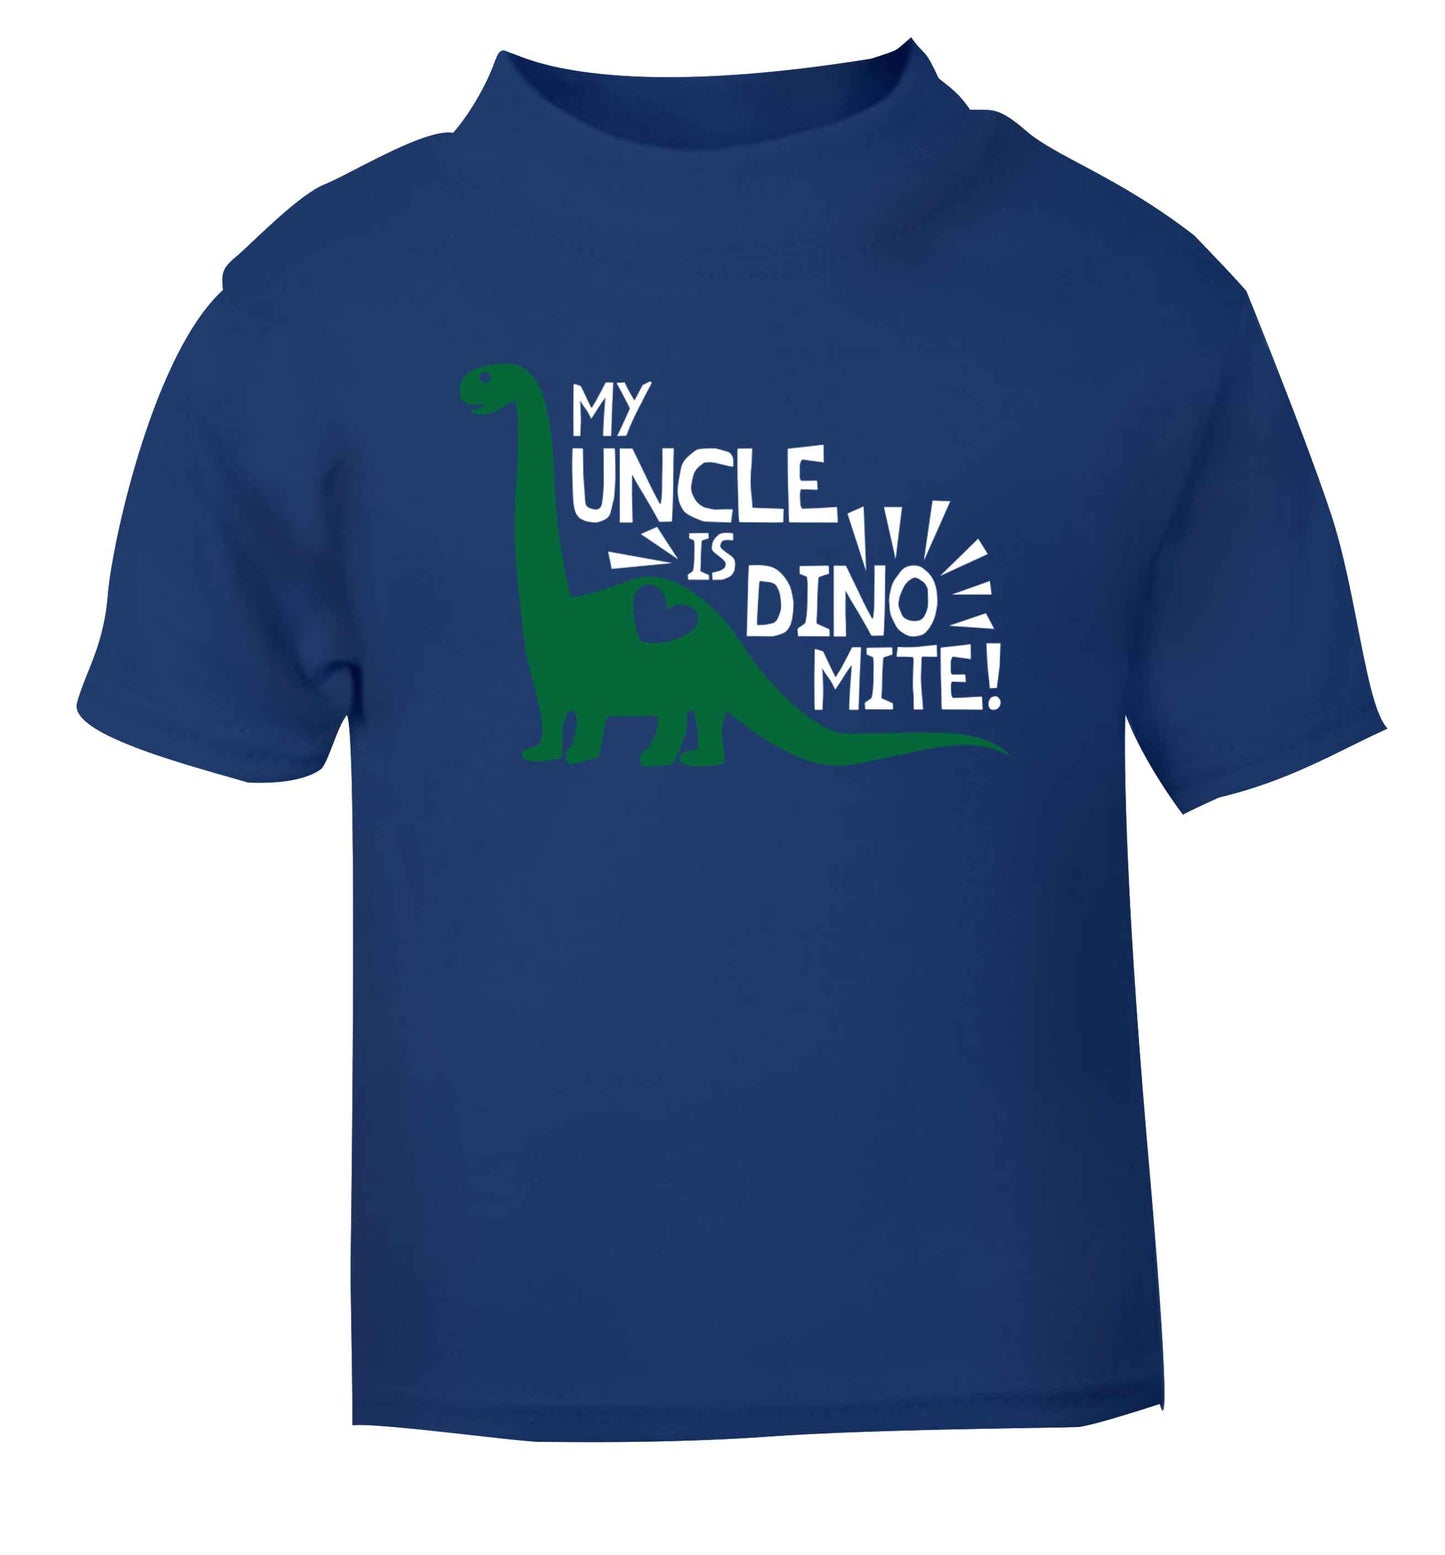 My uncle is dinomite! blue Baby Toddler Tshirt 2 Years